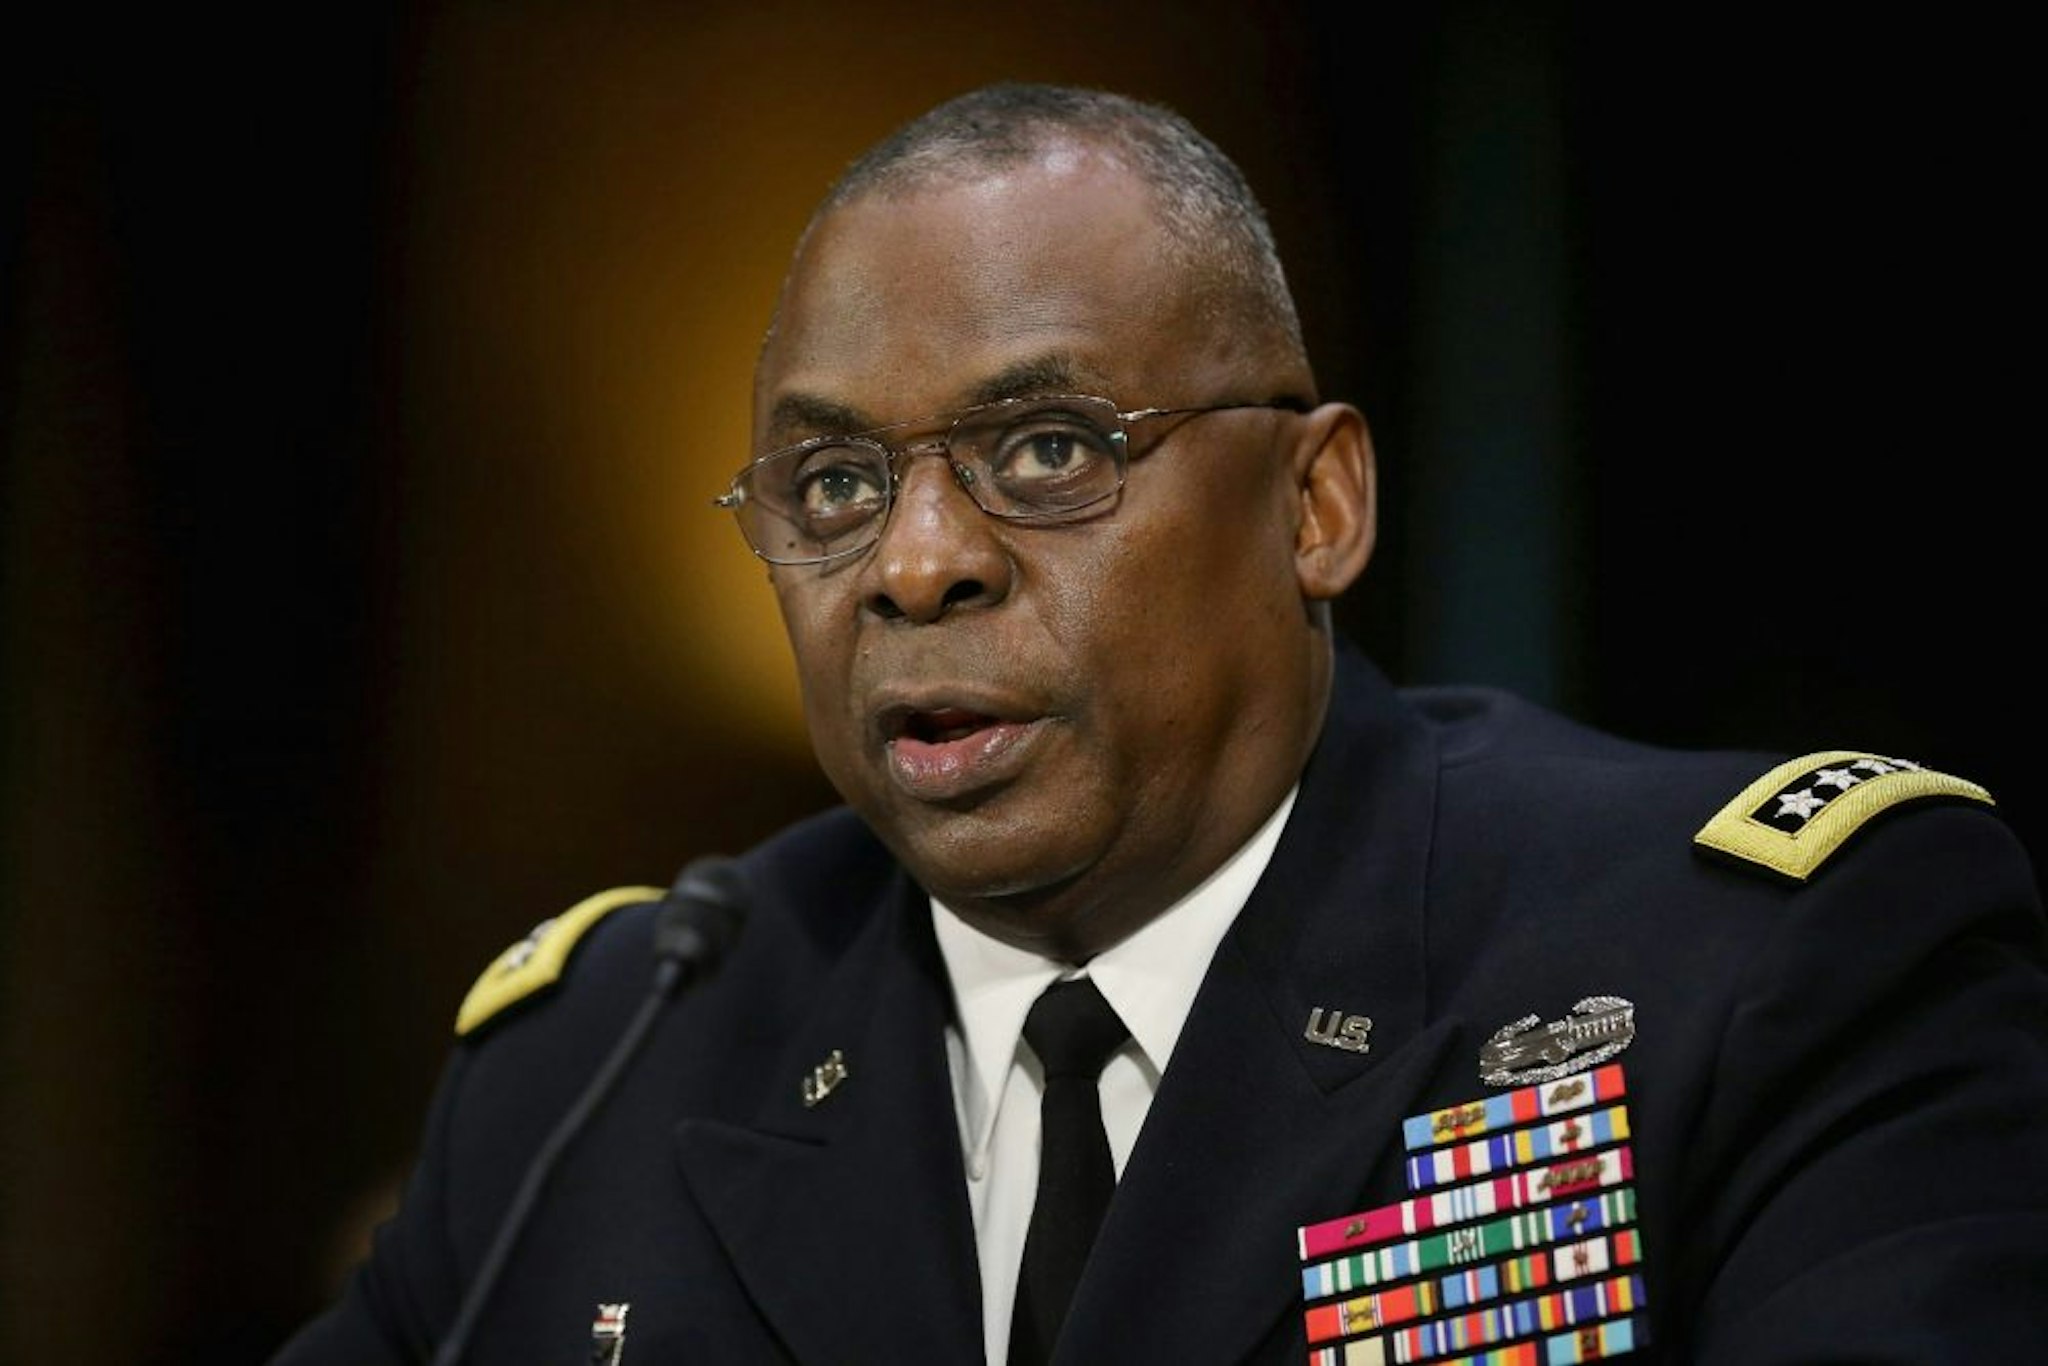 WASHINGTON, DC - SEPTEMBER 16: Gen. Lloyd Austin III, commander of U.S. Central Command, testifies before the Senate Armed Services Committee about the ongoing U.S. military operations to counter the Islamic State in Iraq and the Levant (ISIL) during a hearing in the Dirksen Senate Office Building on Capitol Hill September 16, 2015 in Washington, DC. Austin said that slow progress was still being made against ISIL but there have been setbacks, including the ambush of U.S.-trained fighters in Syria and the buildup of Russian forces in the country.